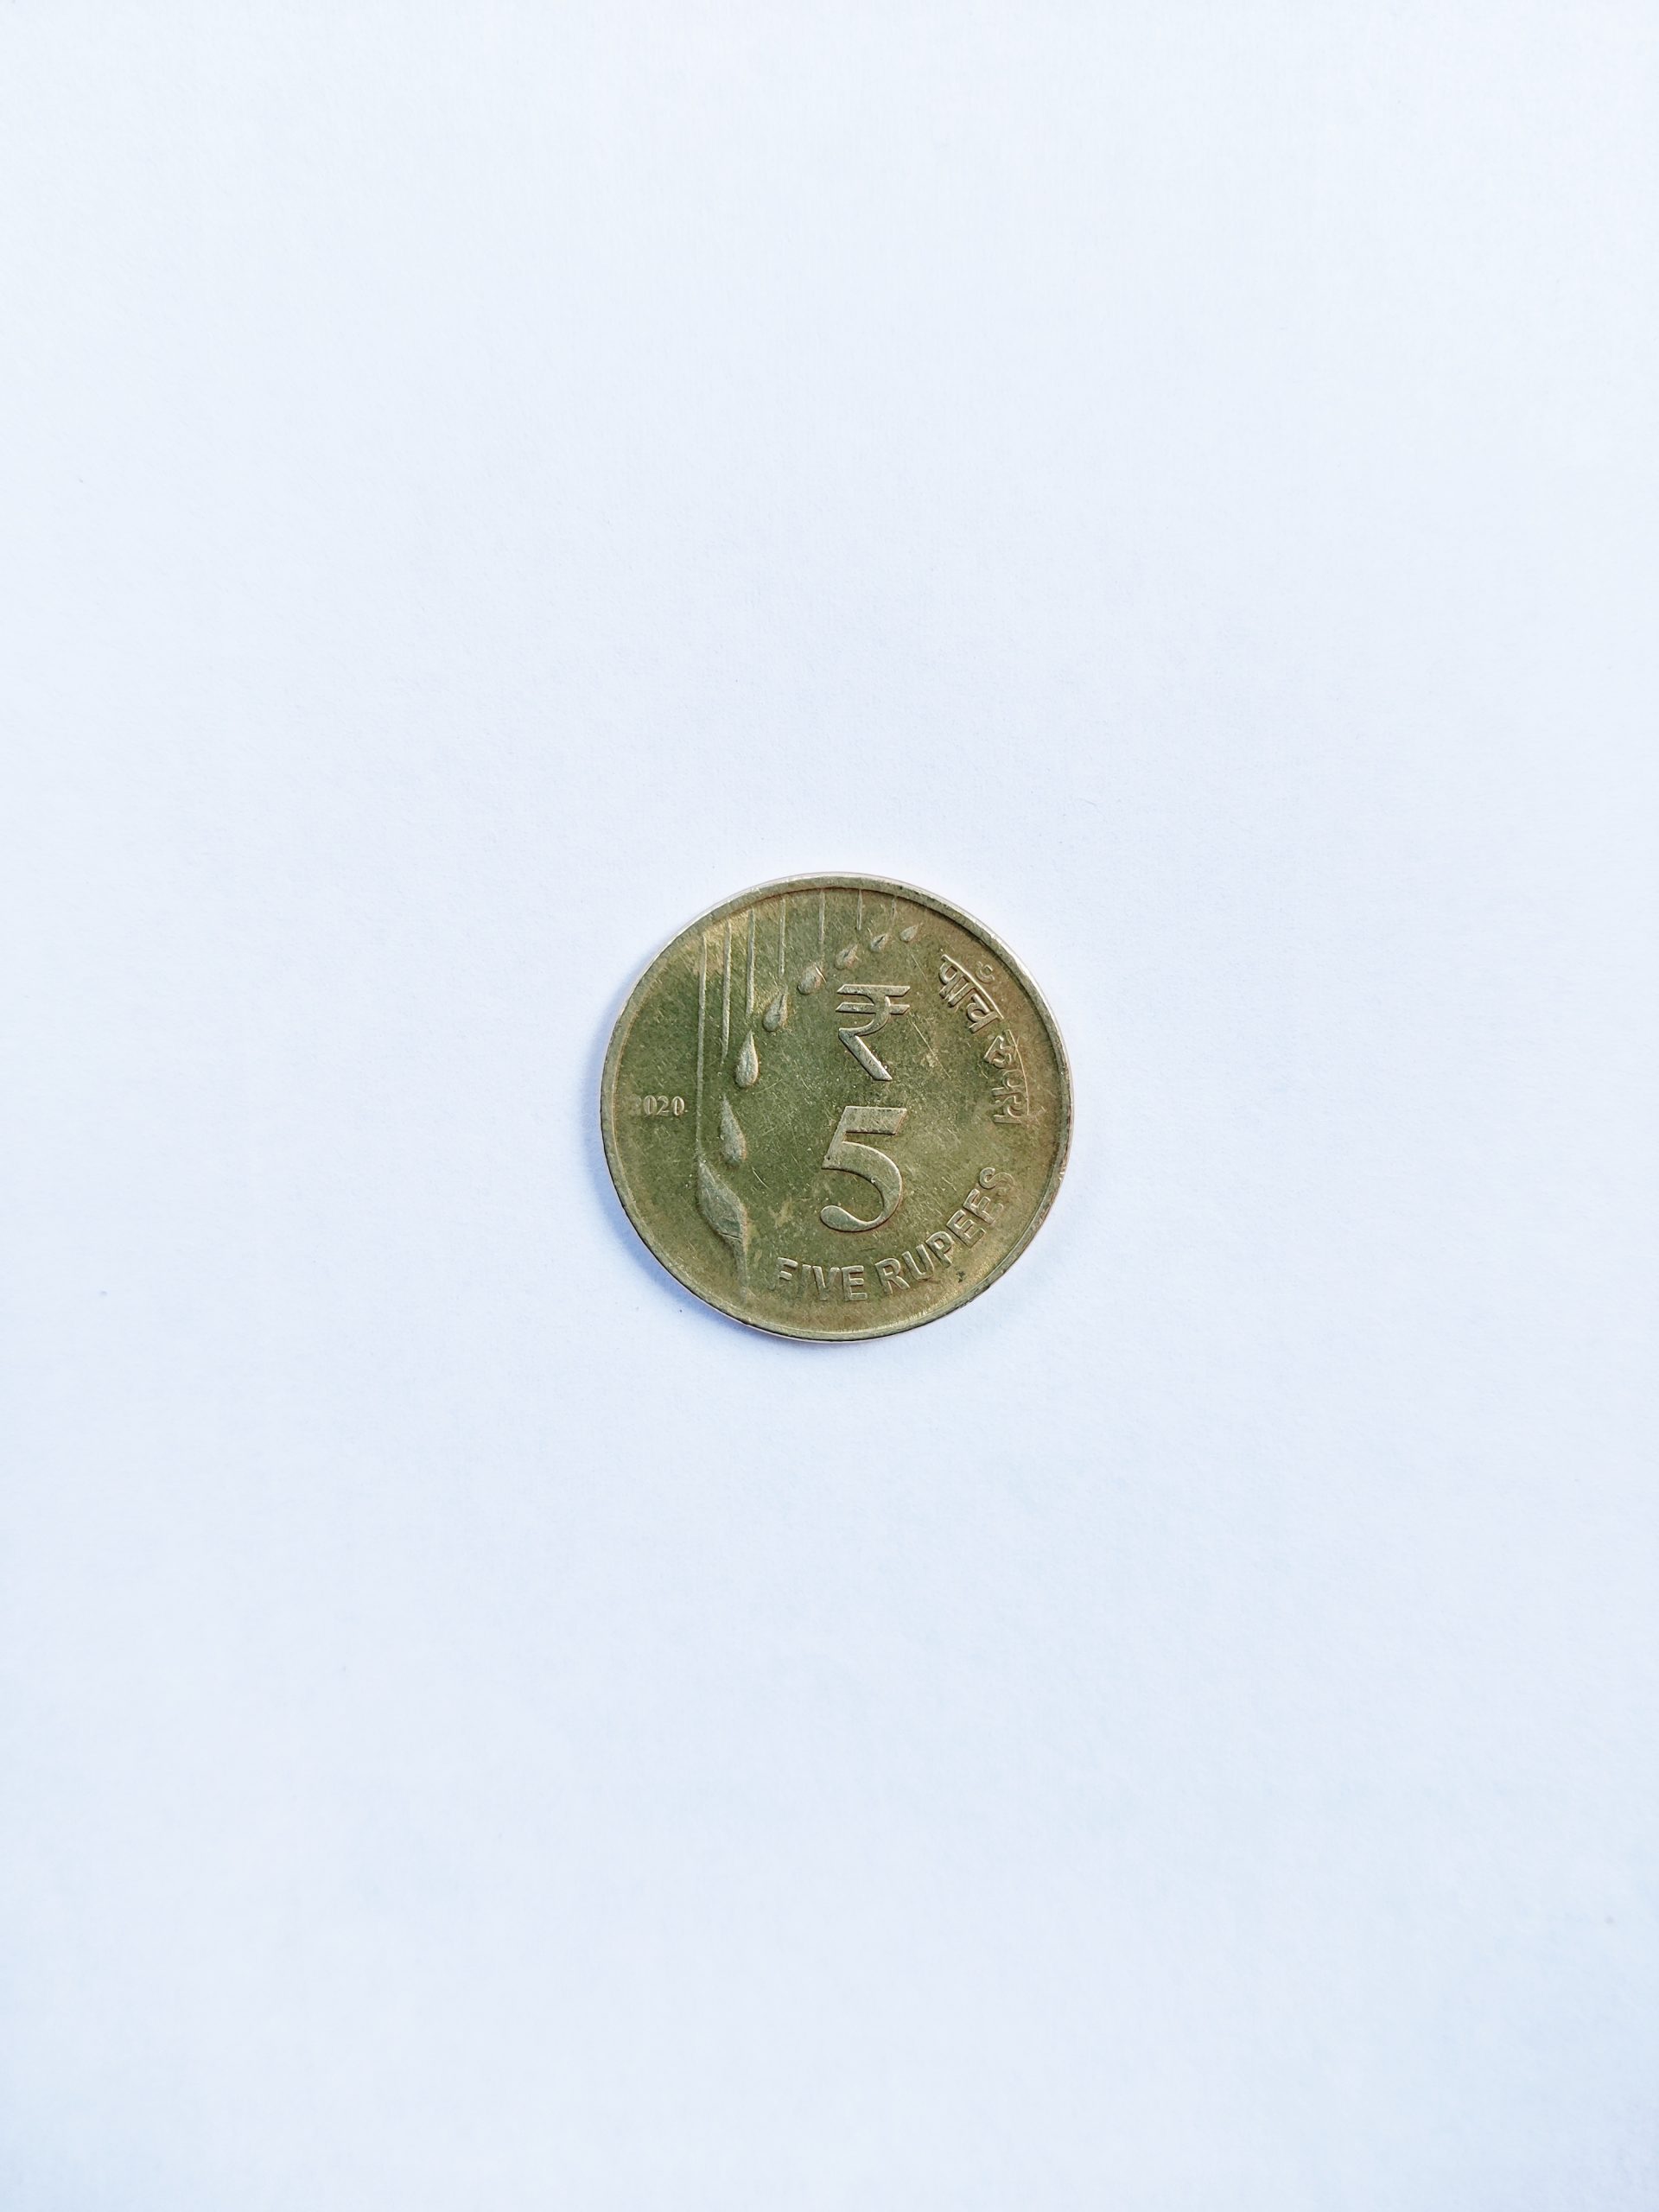 5 rupees coin